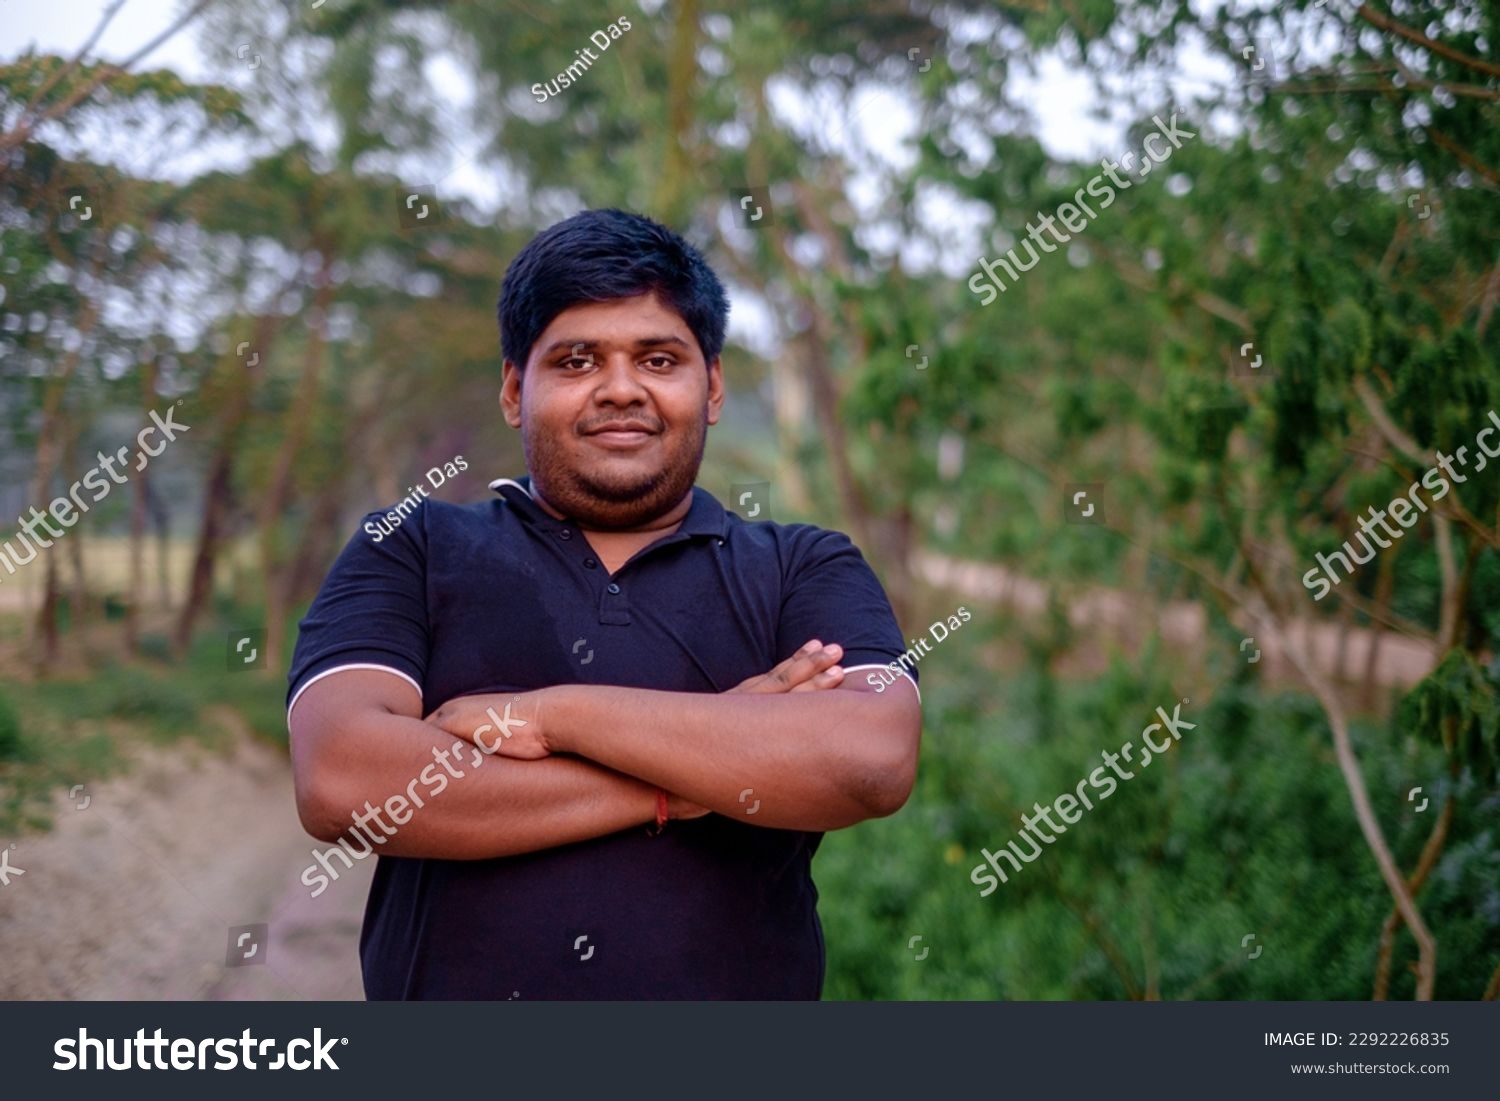 stock-photo-south-asian-overweight-young-man-standing-within-green-natural-environment-2292226835.jpg